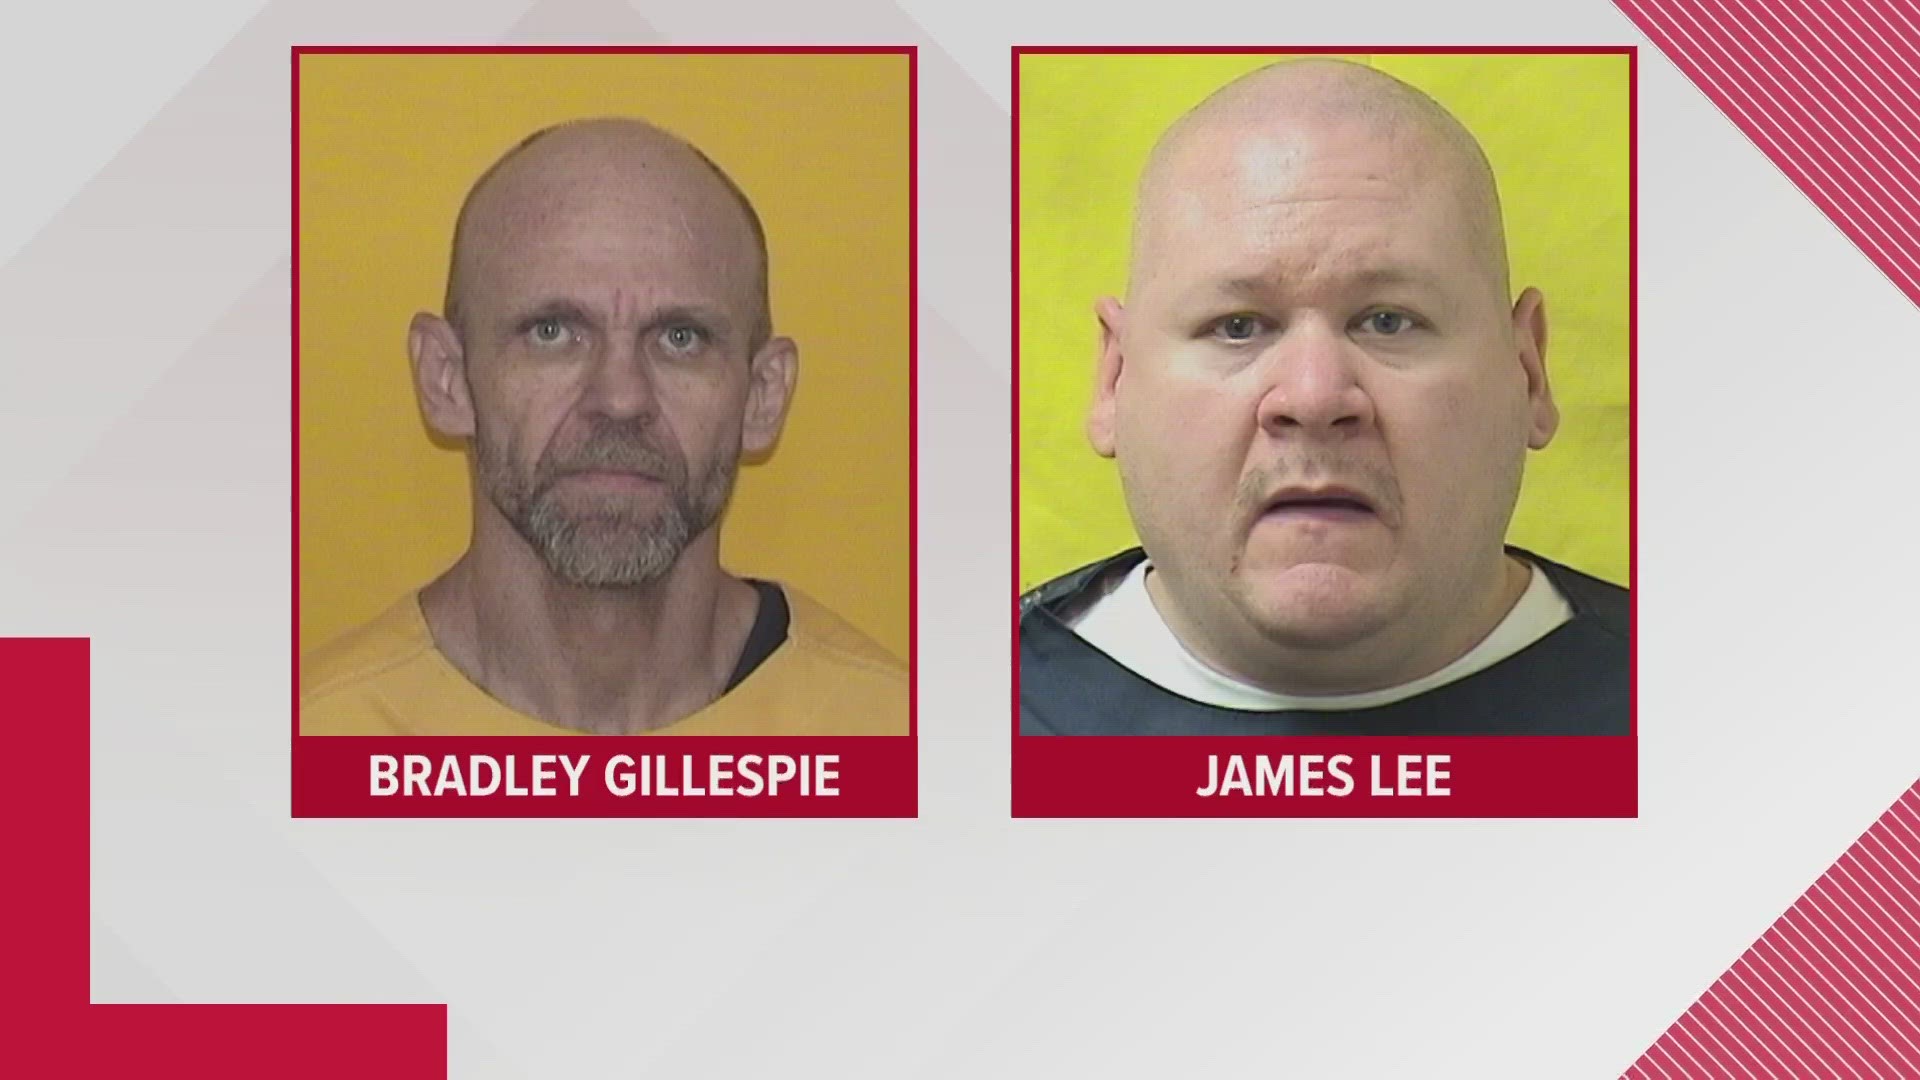 Bradley Gillespie, 50, and James Lee, 47, were reported missing from the Allen Oakwood Correctional Institution in Lima.